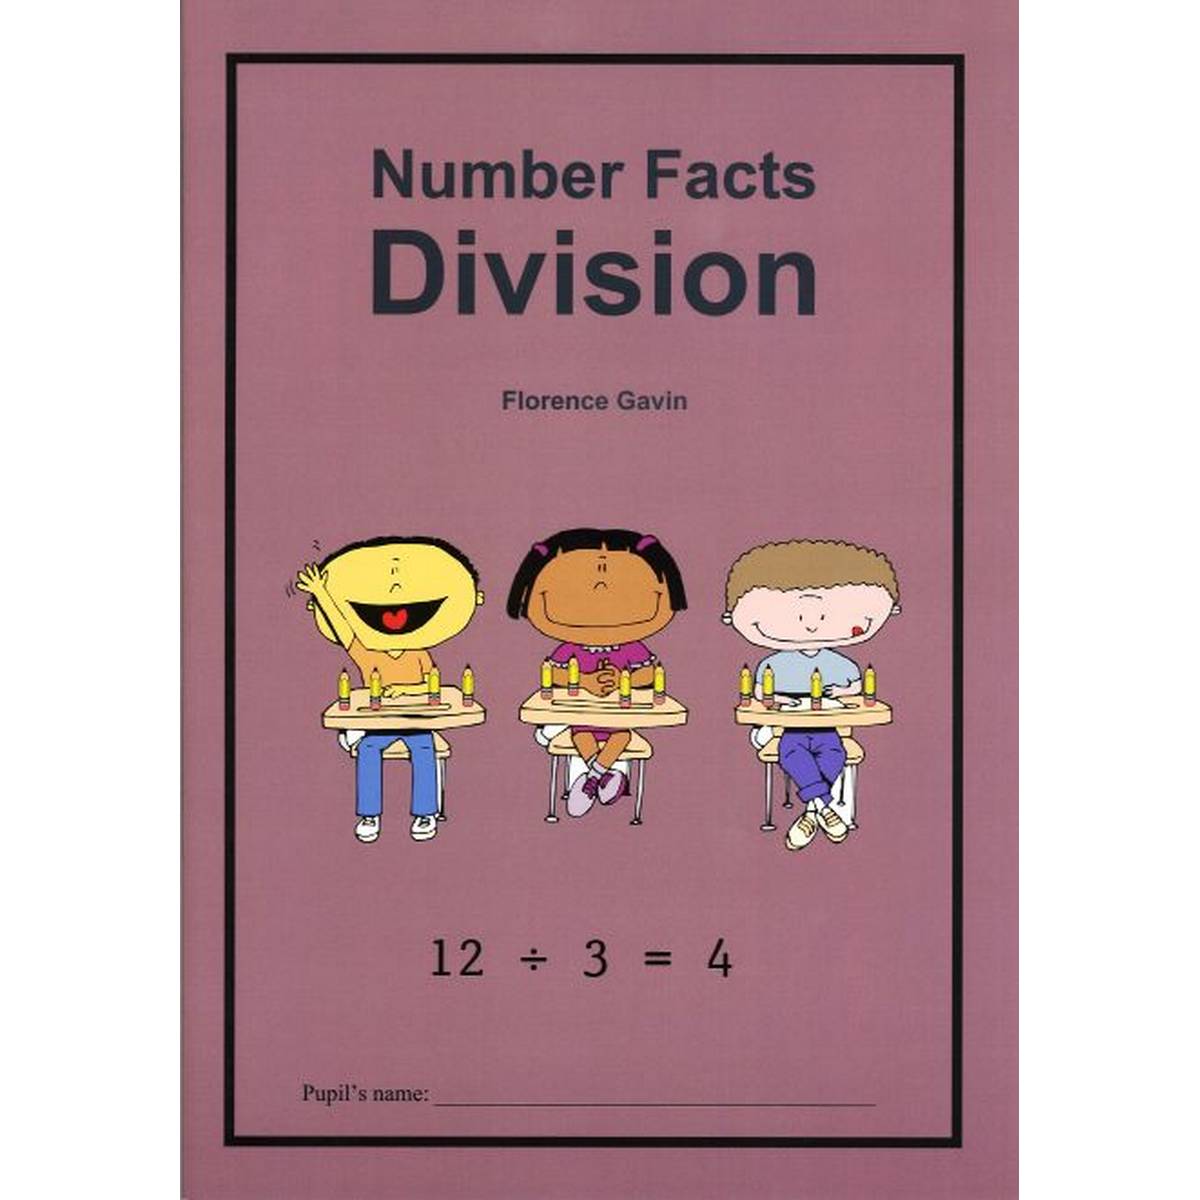 Number Facts - Division